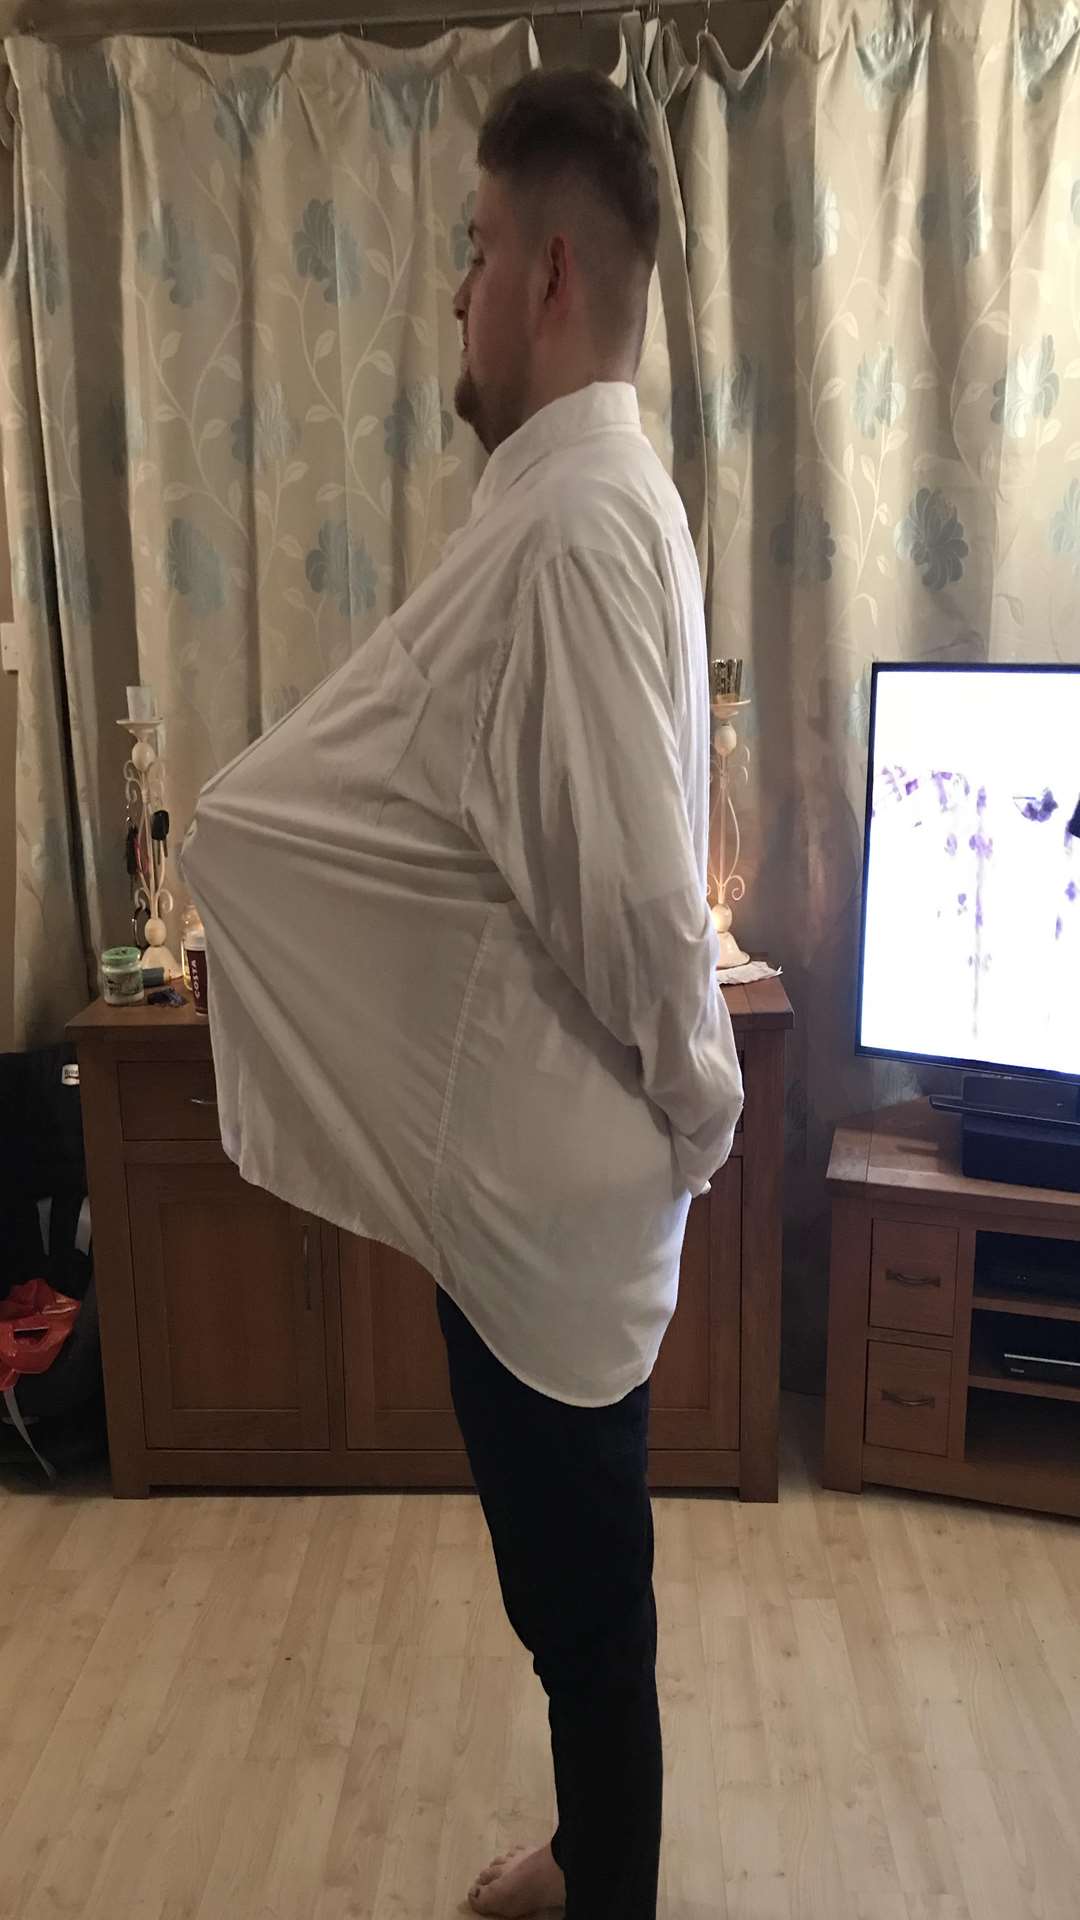 Jack after the weight loss, in one of his former shirts.